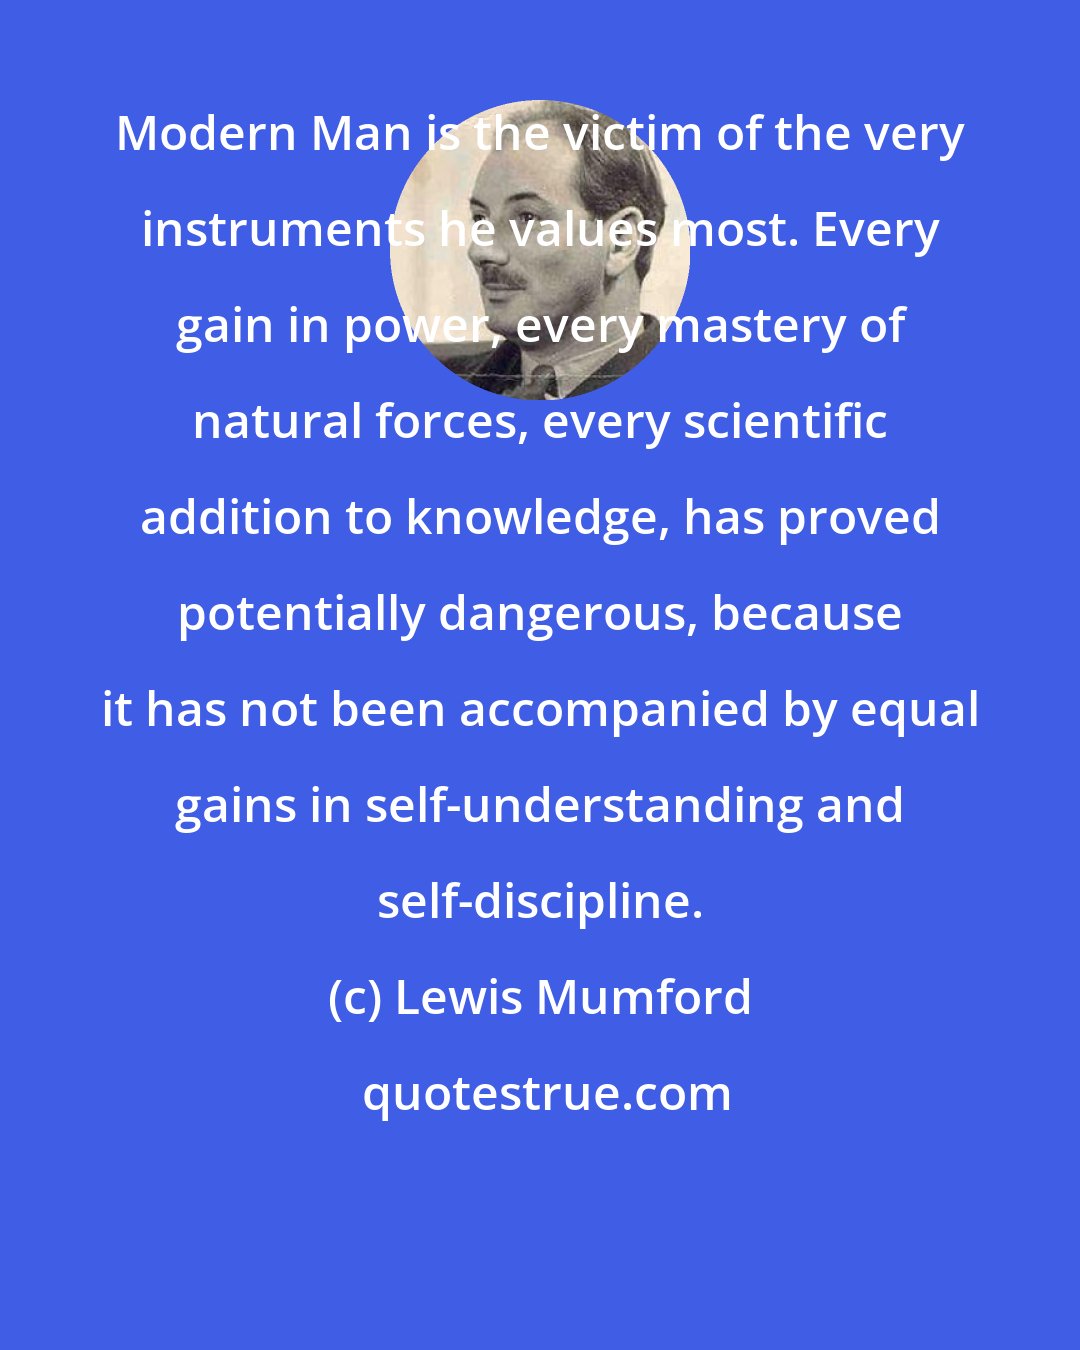 Lewis Mumford: Modern Man is the victim of the very instruments he values most. Every gain in power, every mastery of natural forces, every scientific addition to knowledge, has proved potentially dangerous, because it has not been accompanied by equal gains in self-understanding and self-discipline.